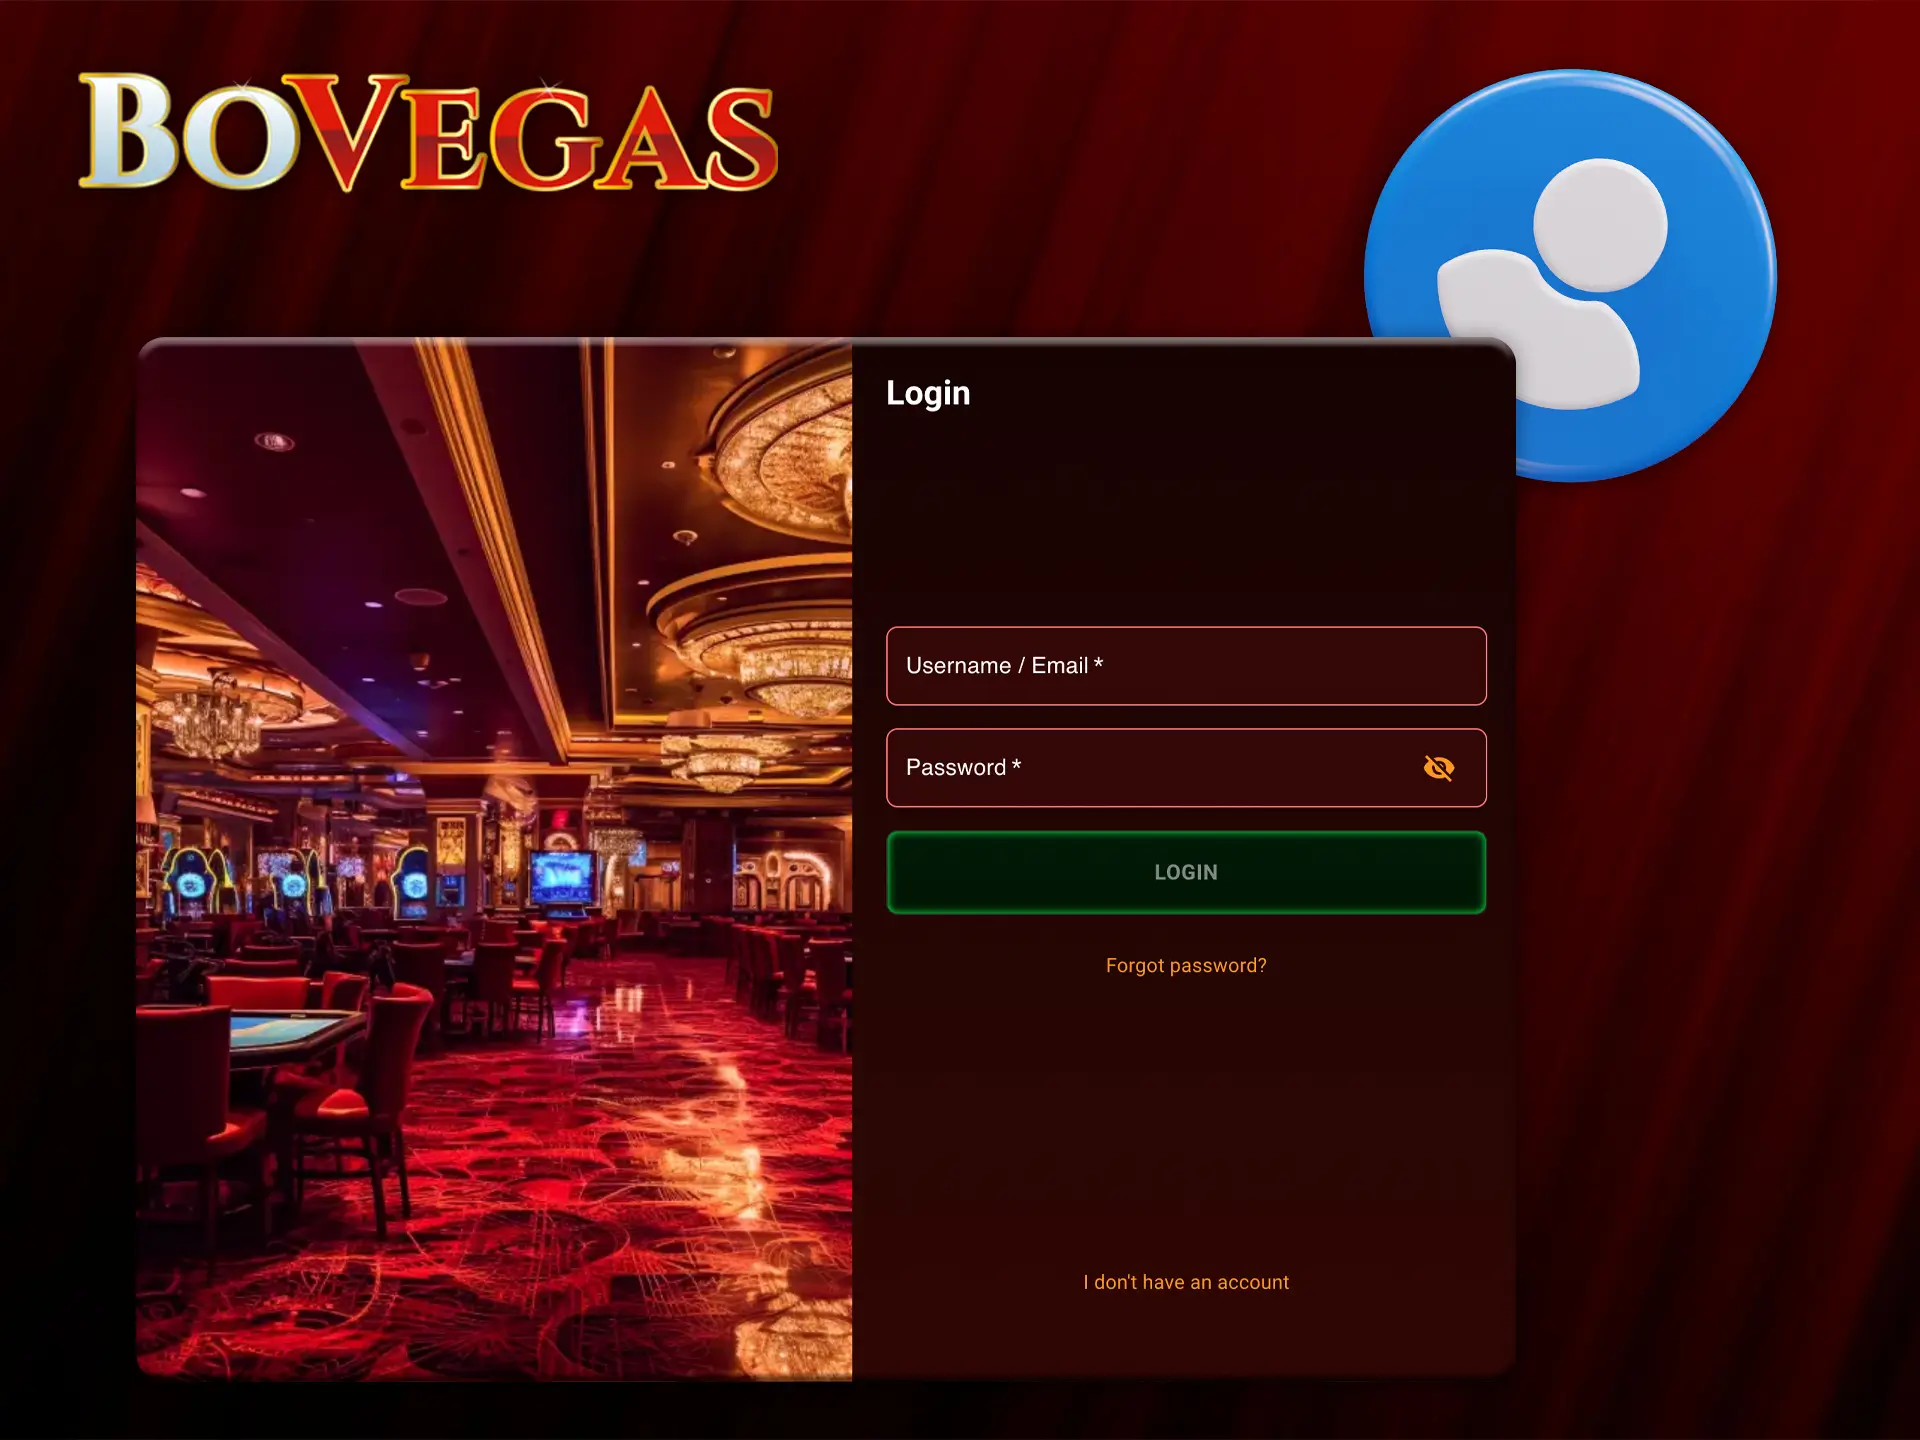 Enter your e-mail and password to log in to BoVegas account.